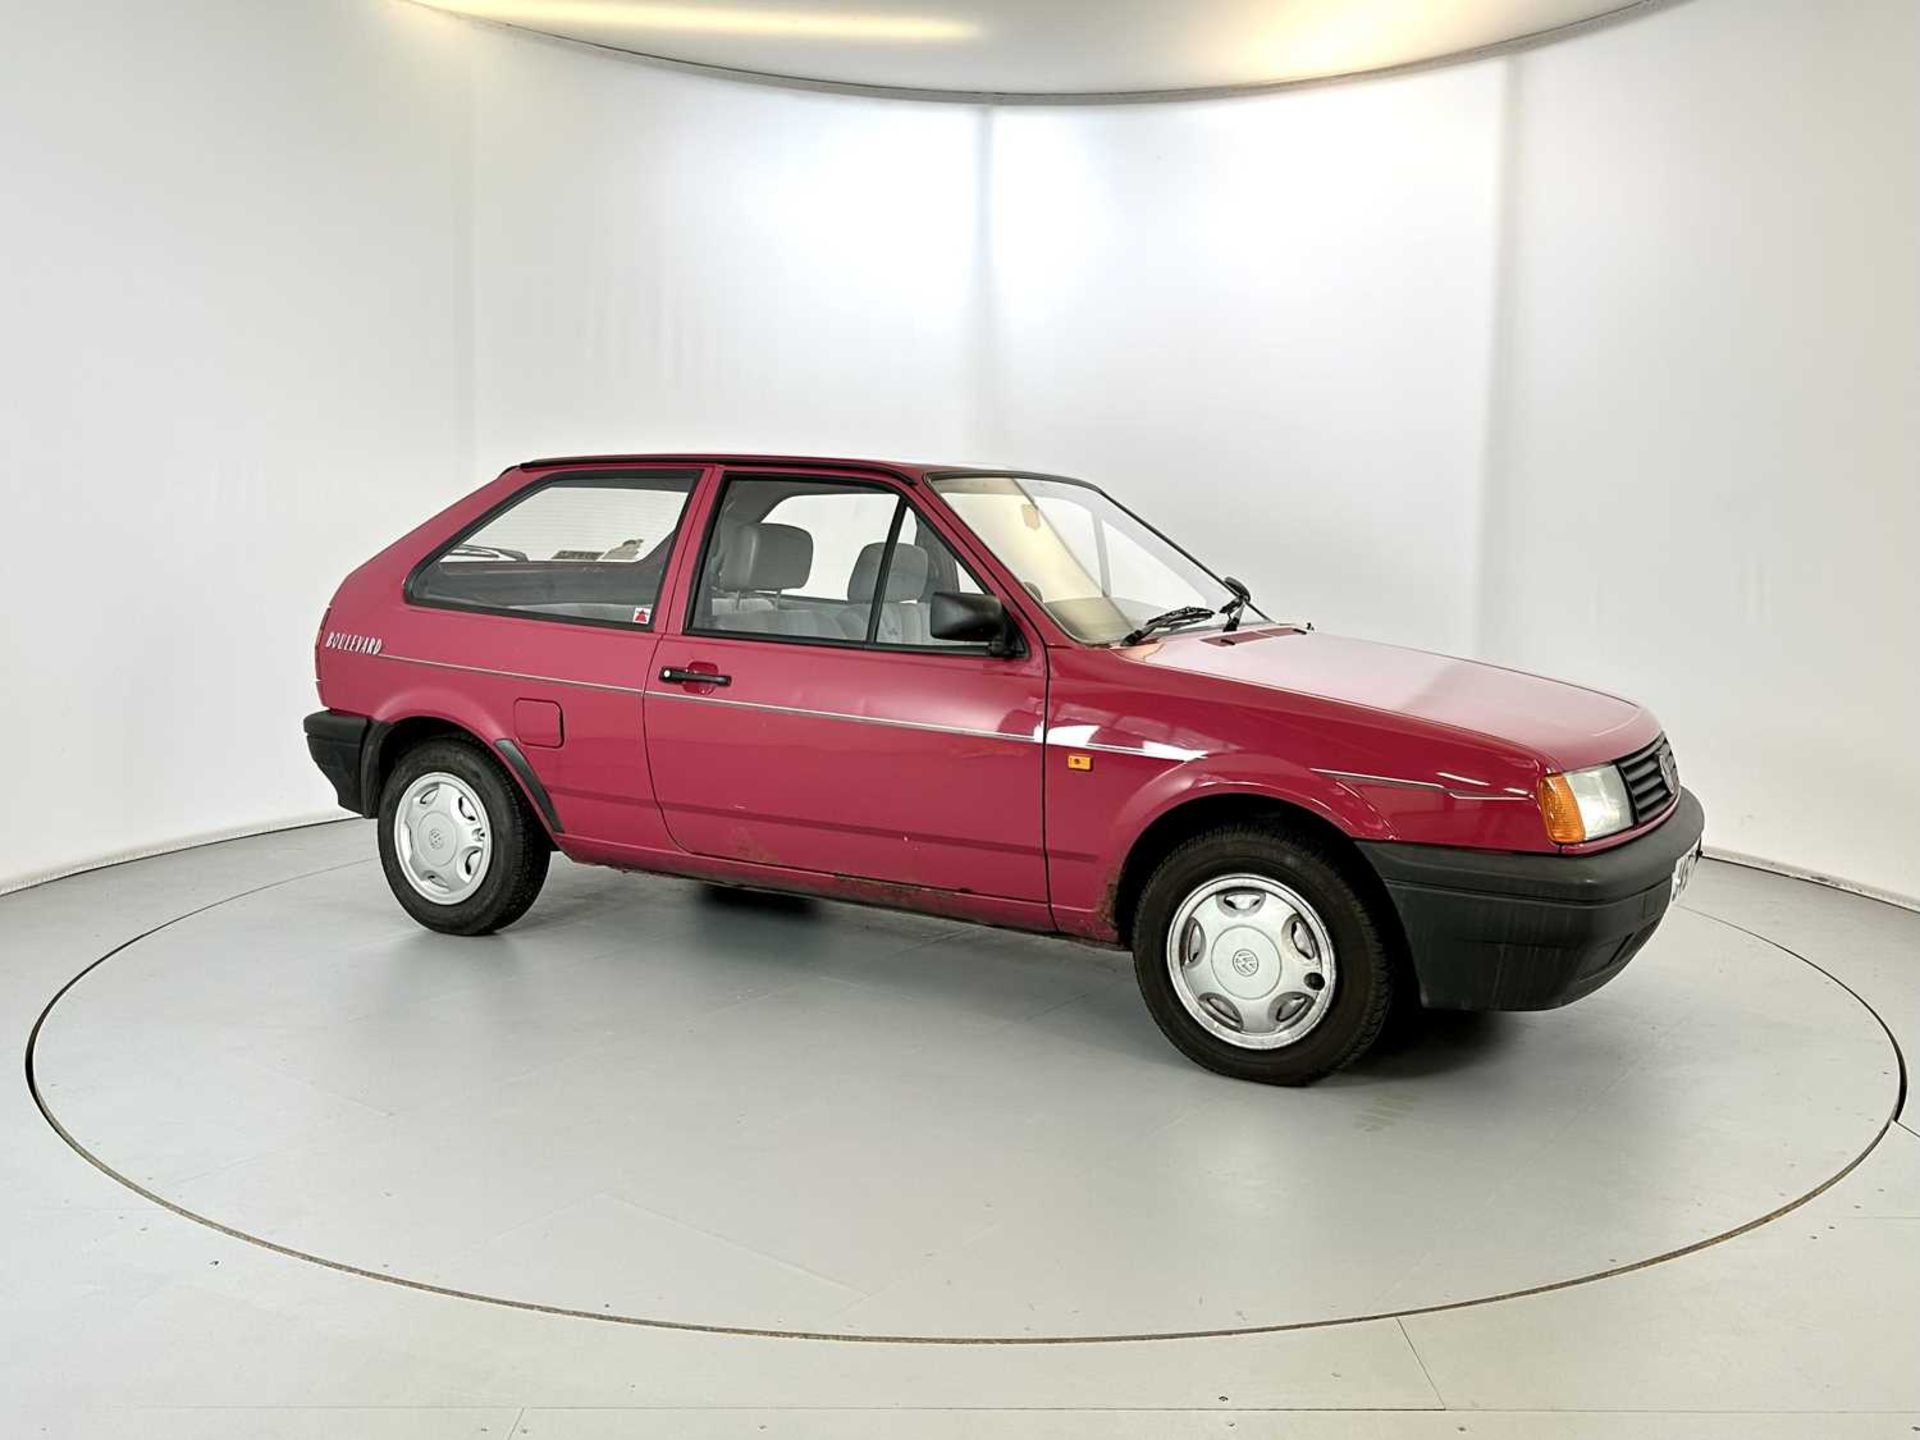 1991 Volkswagen Polo - Image 12 of 29